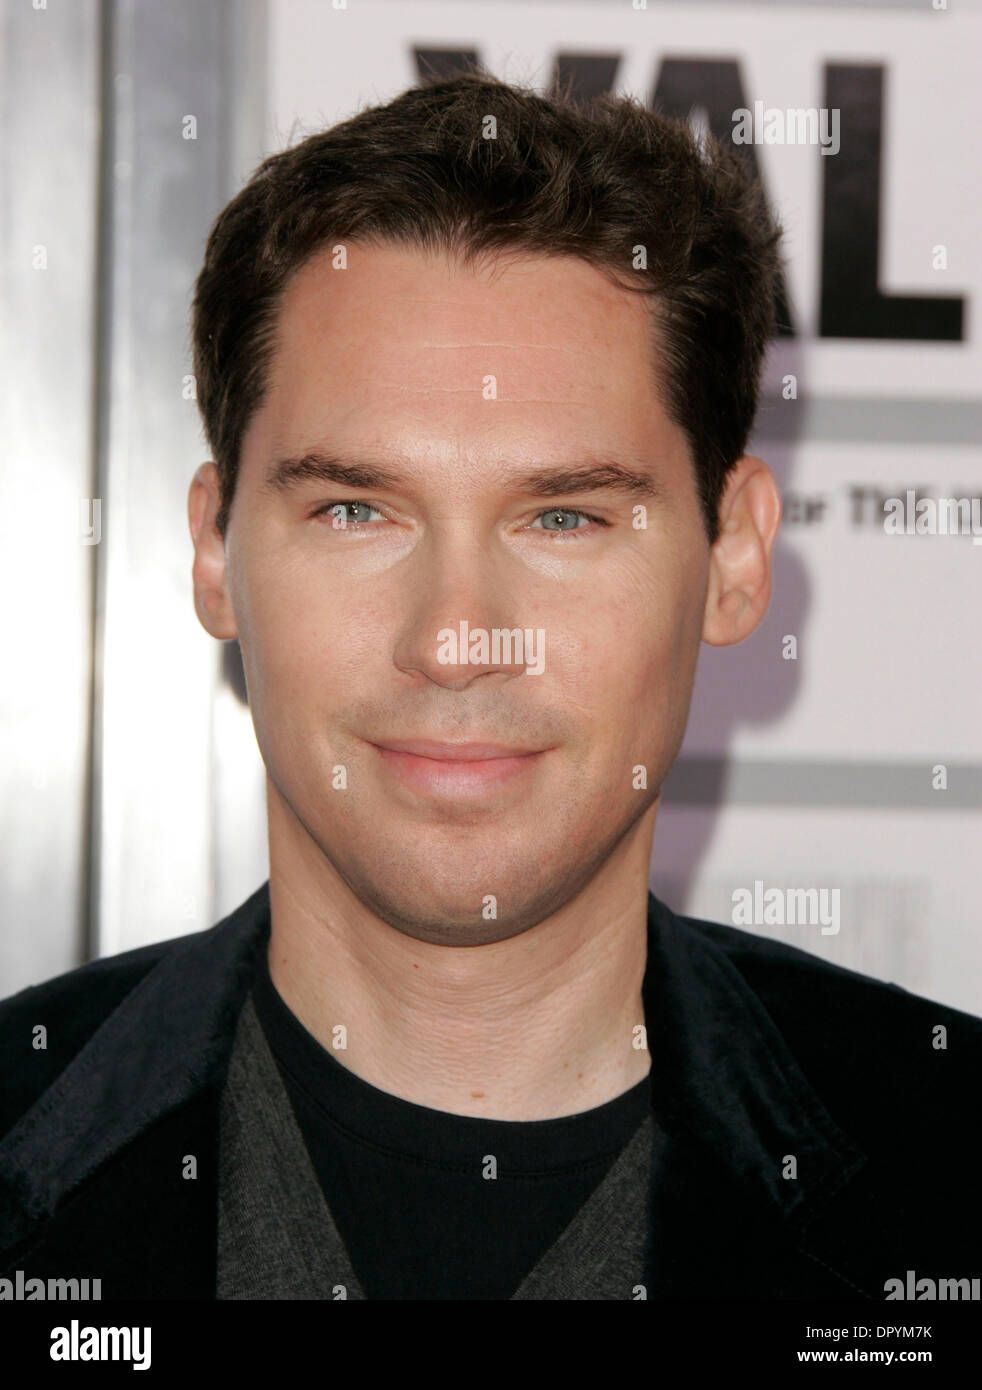 Dec 18, 2008 - Los Angeles, California, USA - Director BRYAN SINGER arriving to 'Valkyrie' Los Angeles Premiere held at the Director's Guild of America. (Credit Image: © Lisa O'Connor/ZUMA Press) Stock Photo